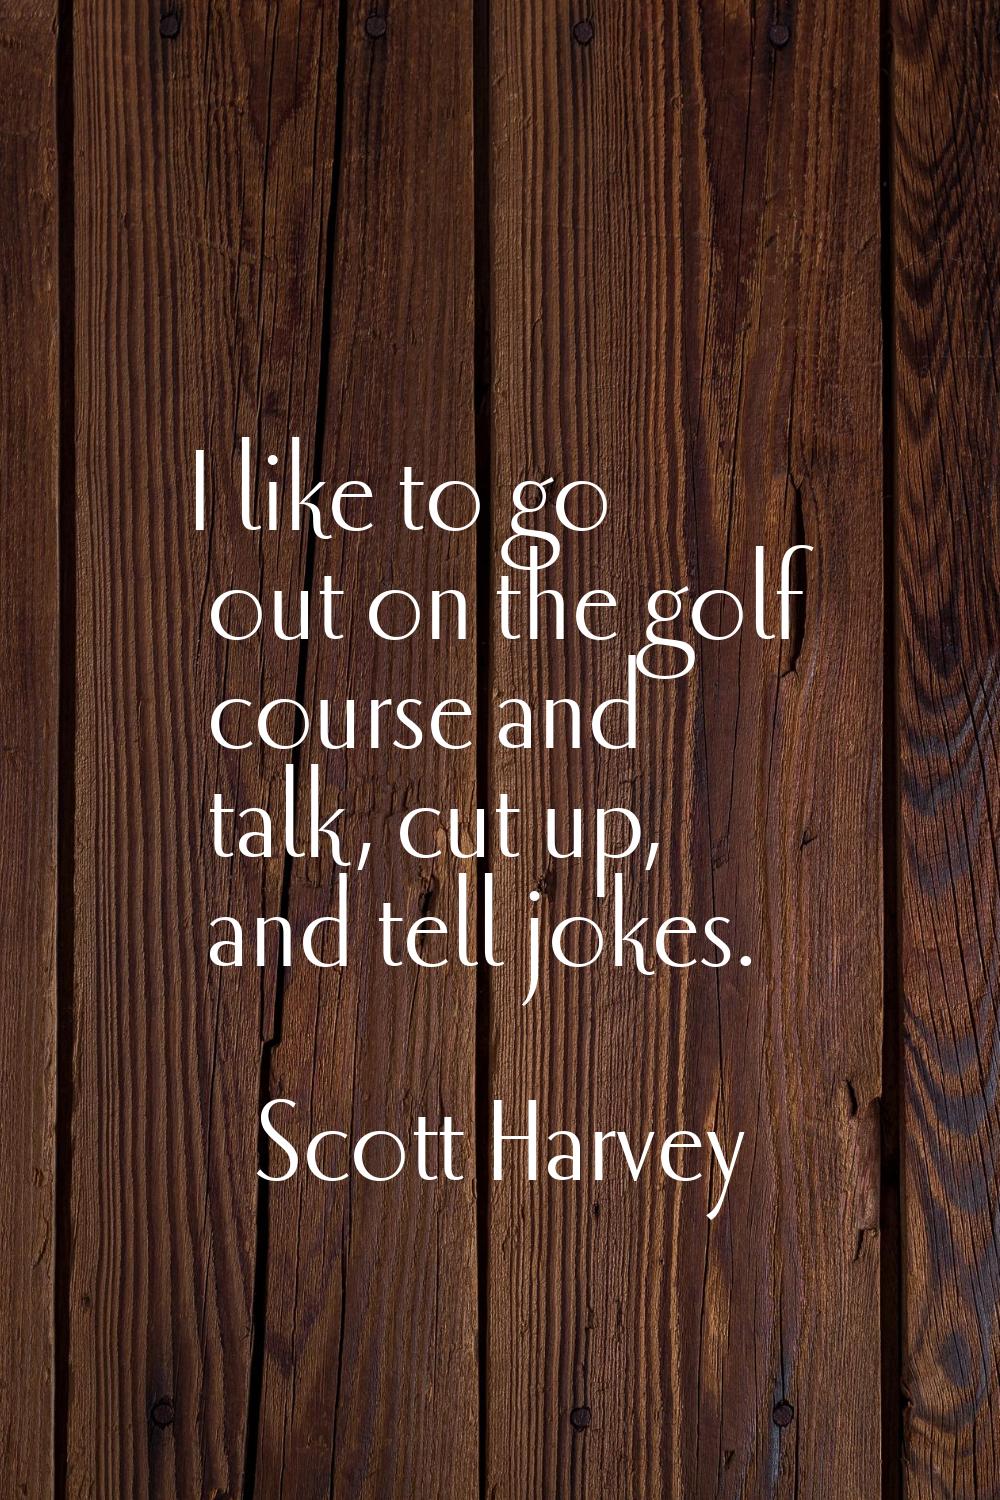 I like to go out on the golf course and talk, cut up, and tell jokes.